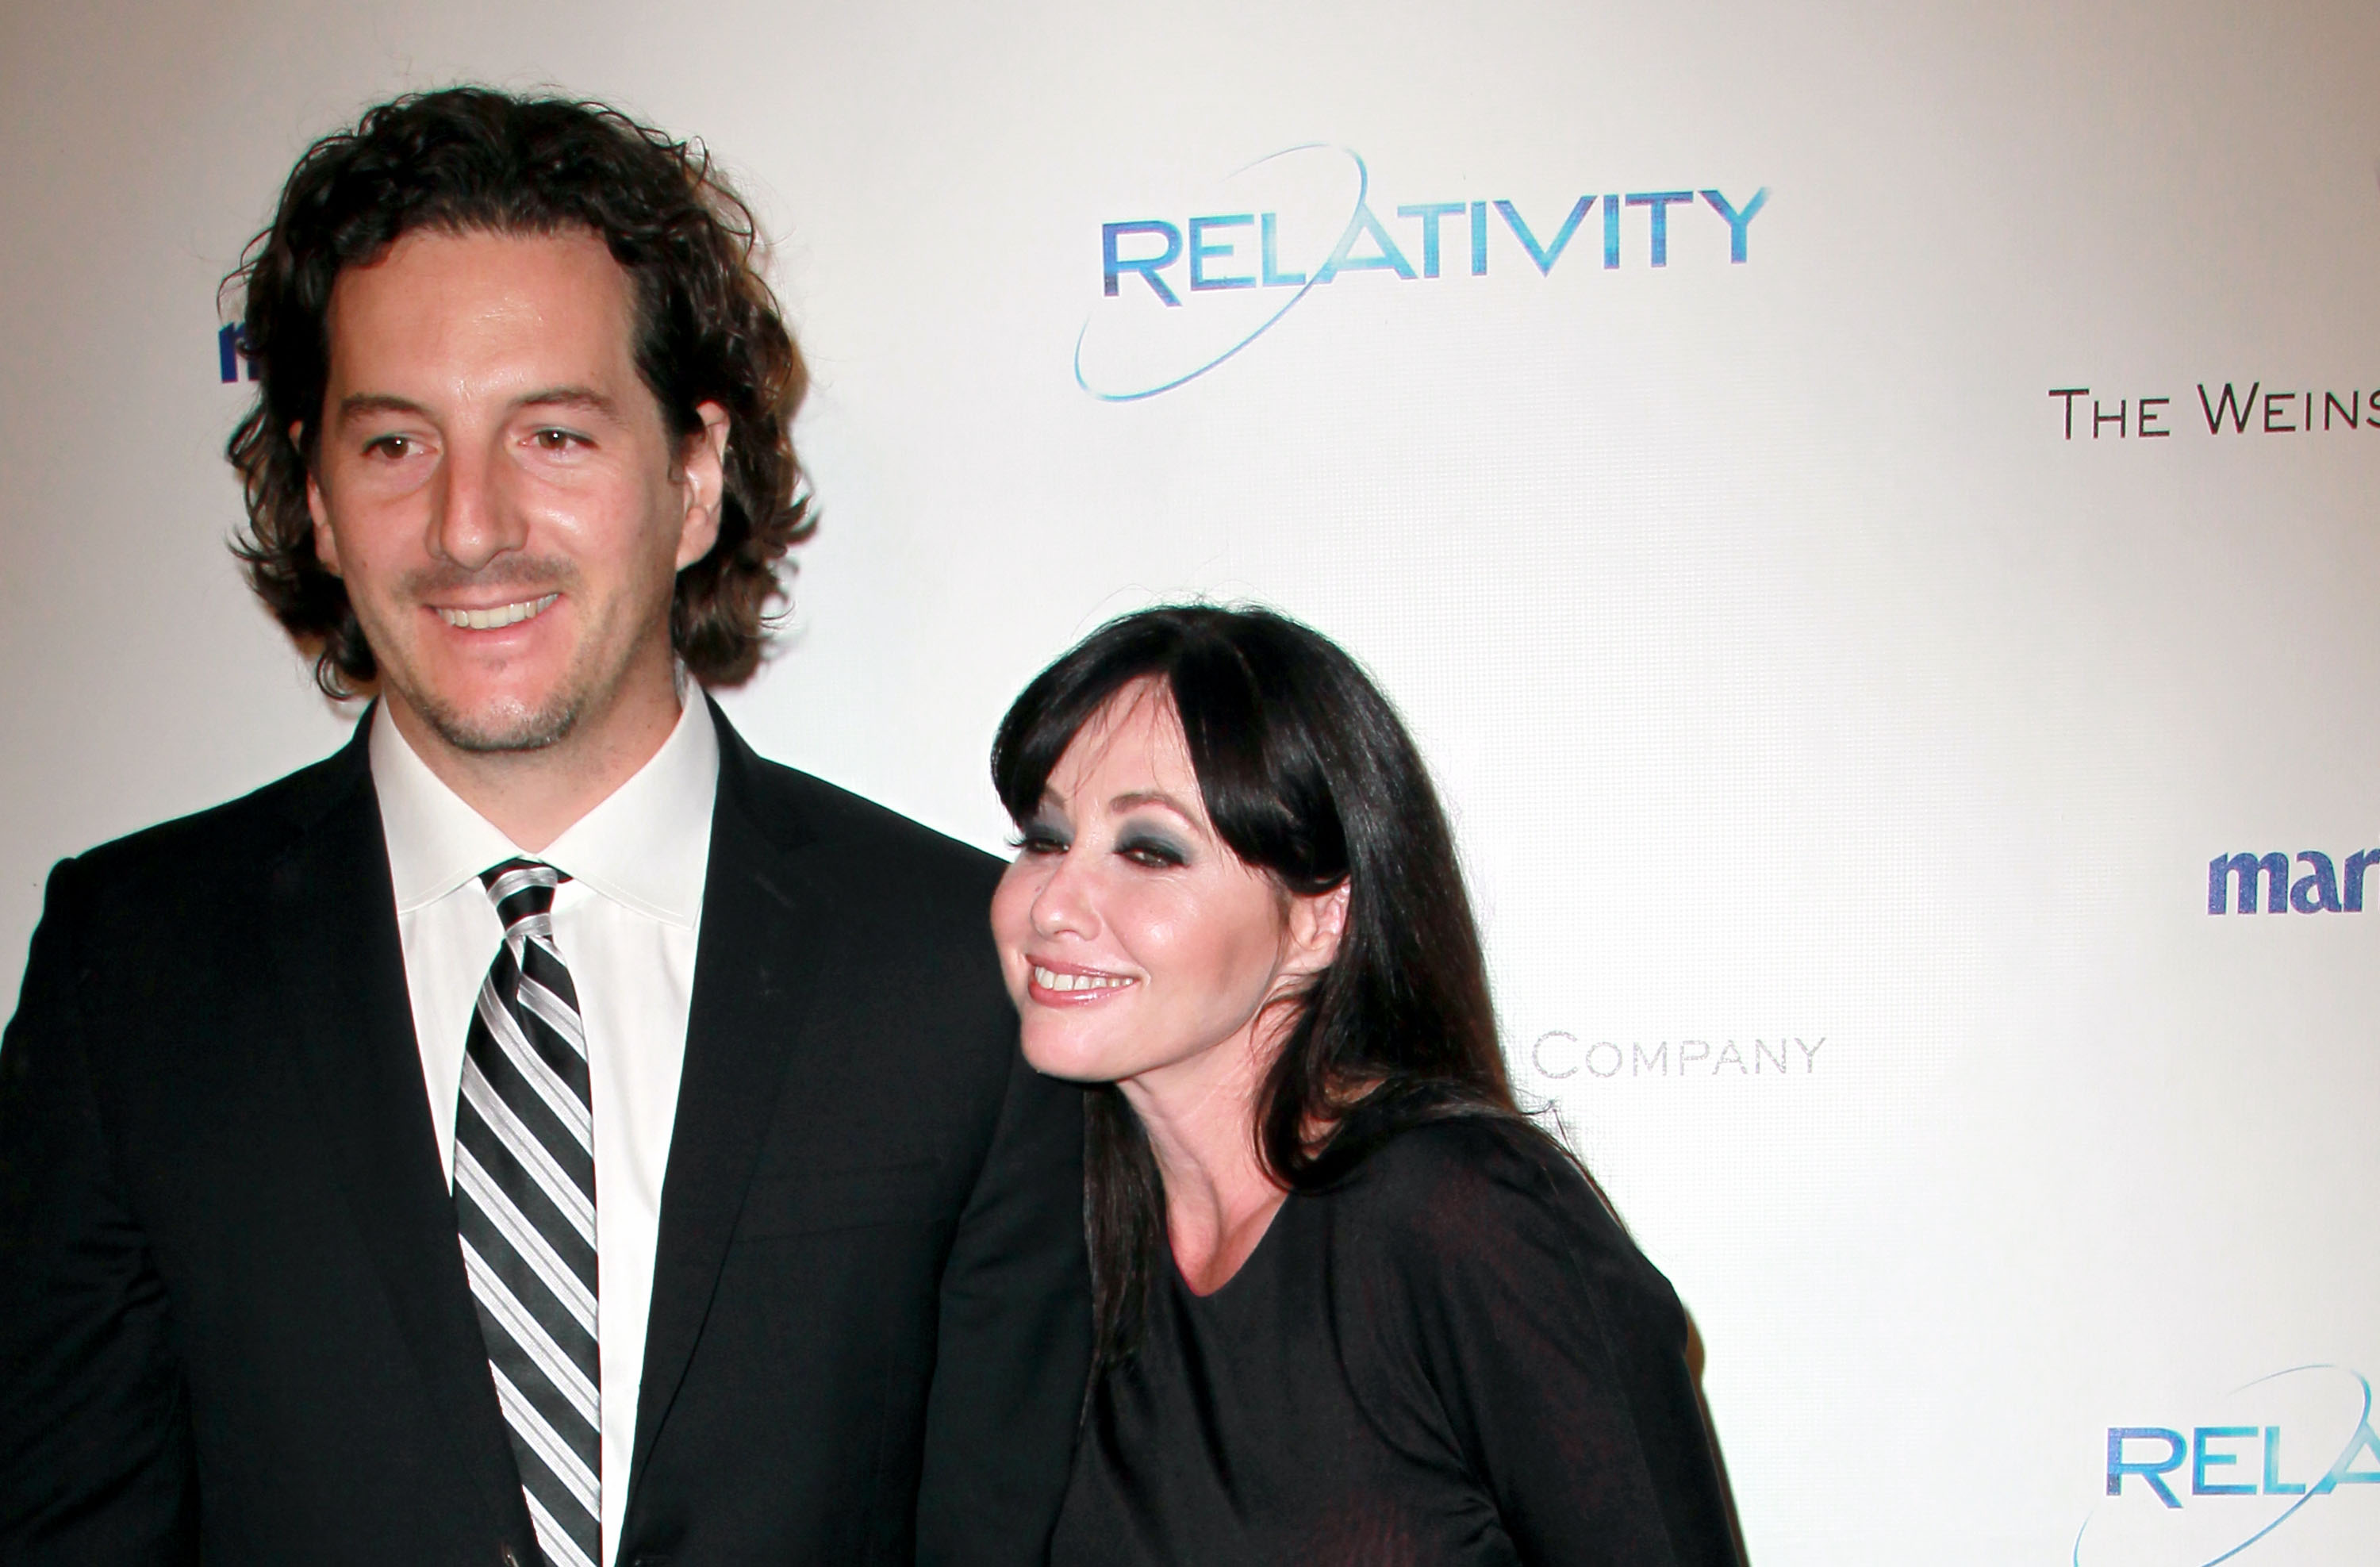 Shannon Doherty and her husband photographer Kurt Iswarienko arrive at The Weinstein Company And Relativity Media's 2011 Golden Globe Awards Party at The Beverly Hilton hotel on January 16, 2011 in Beverly Hills, California | Source: Getty Images